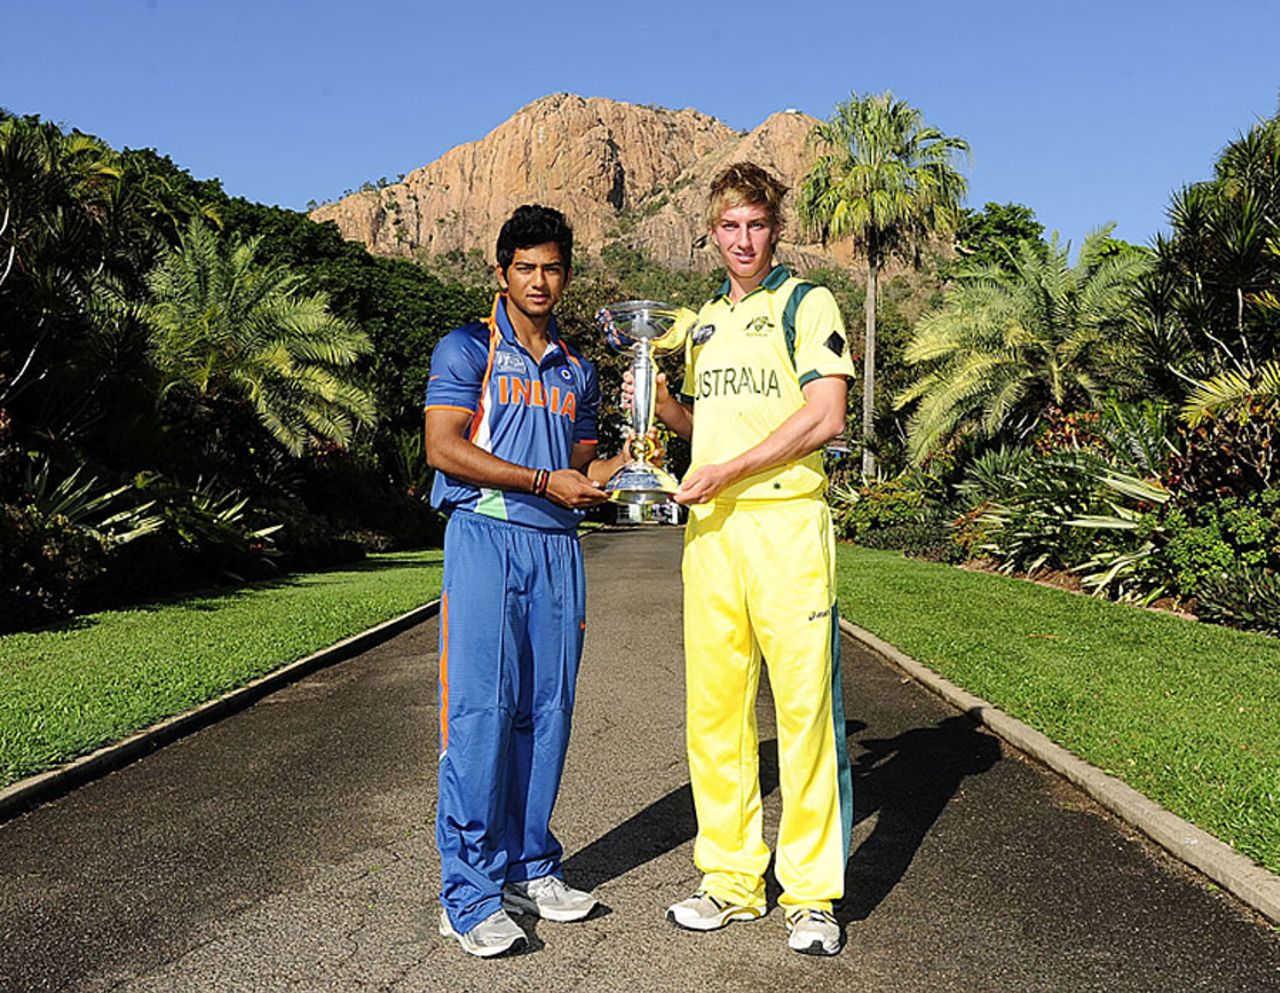 India and Australia's U-19 captains with the trophy ahead of the final, ICC Under-19 World Cup, Townsville, August 25, 2012